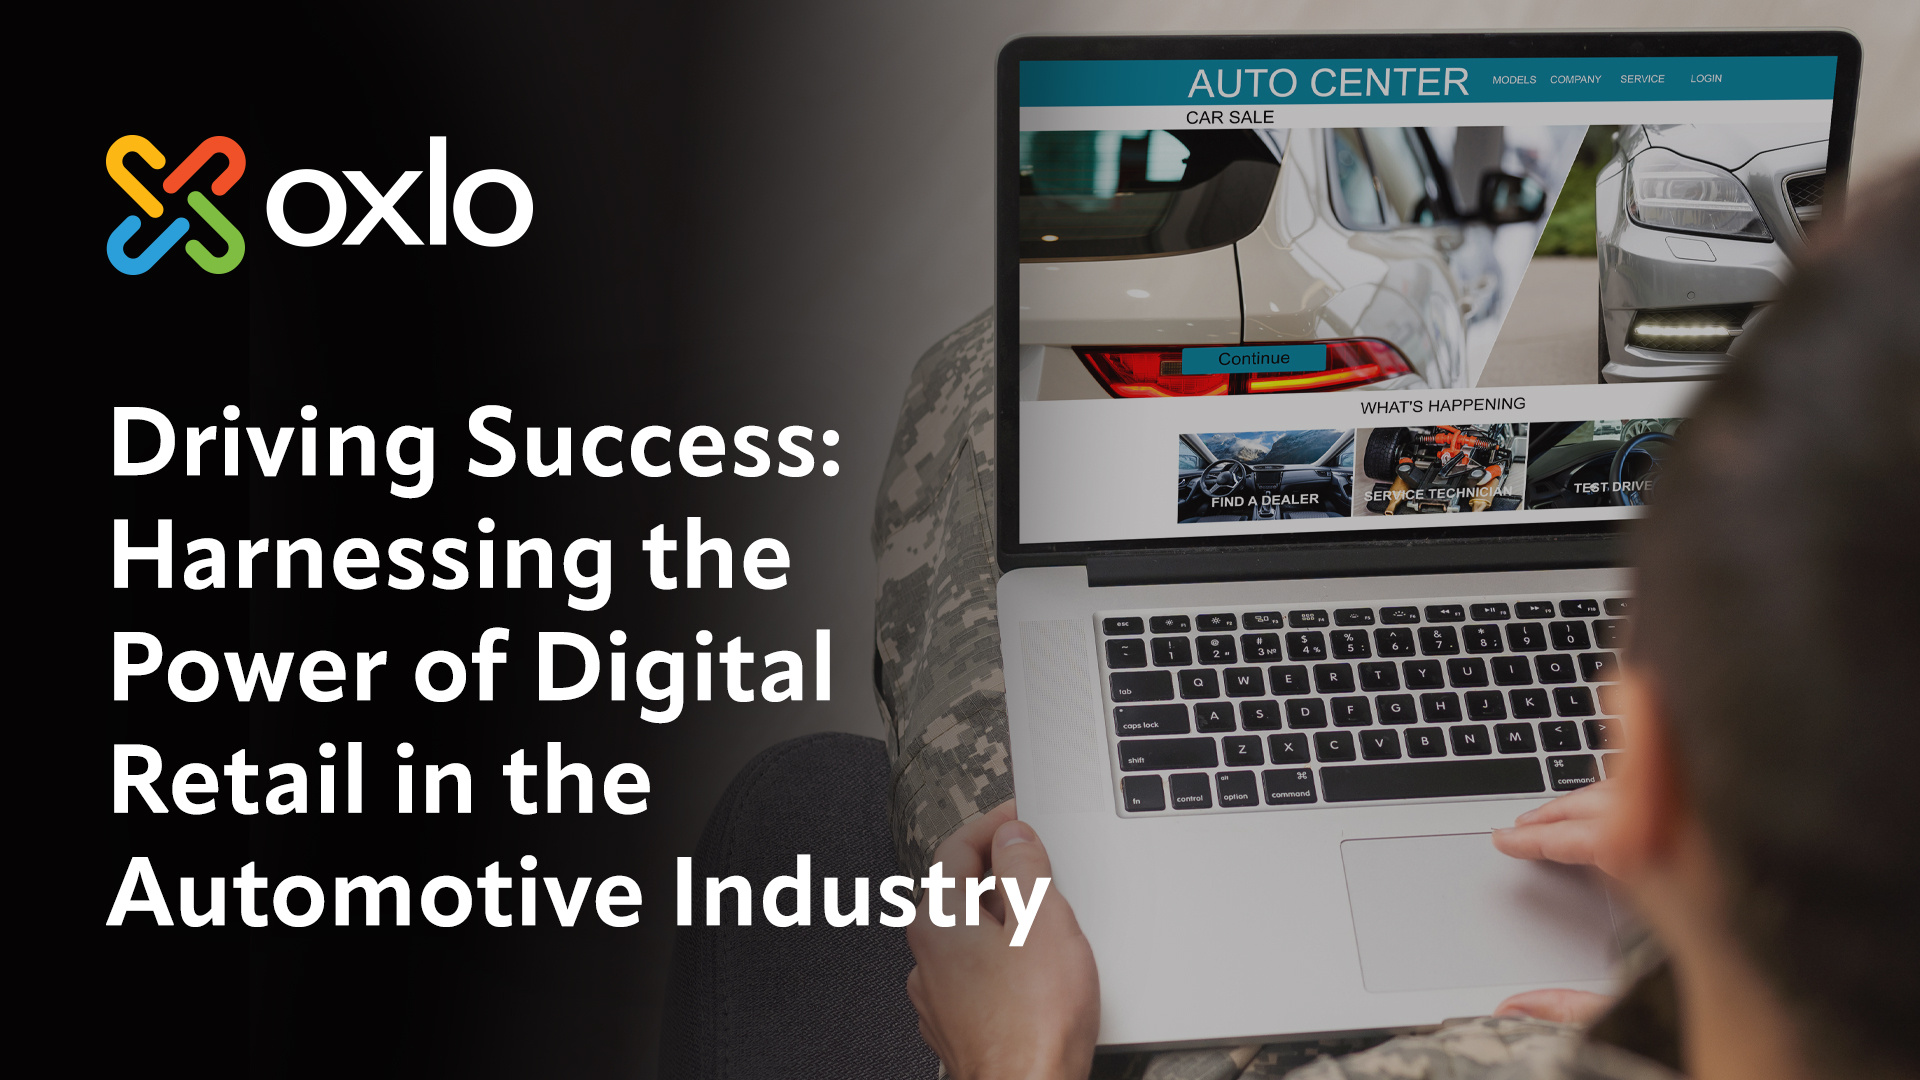 Driving Success: Harnessing the Power of Digital Retail in the Automotive Industry with Oxlo